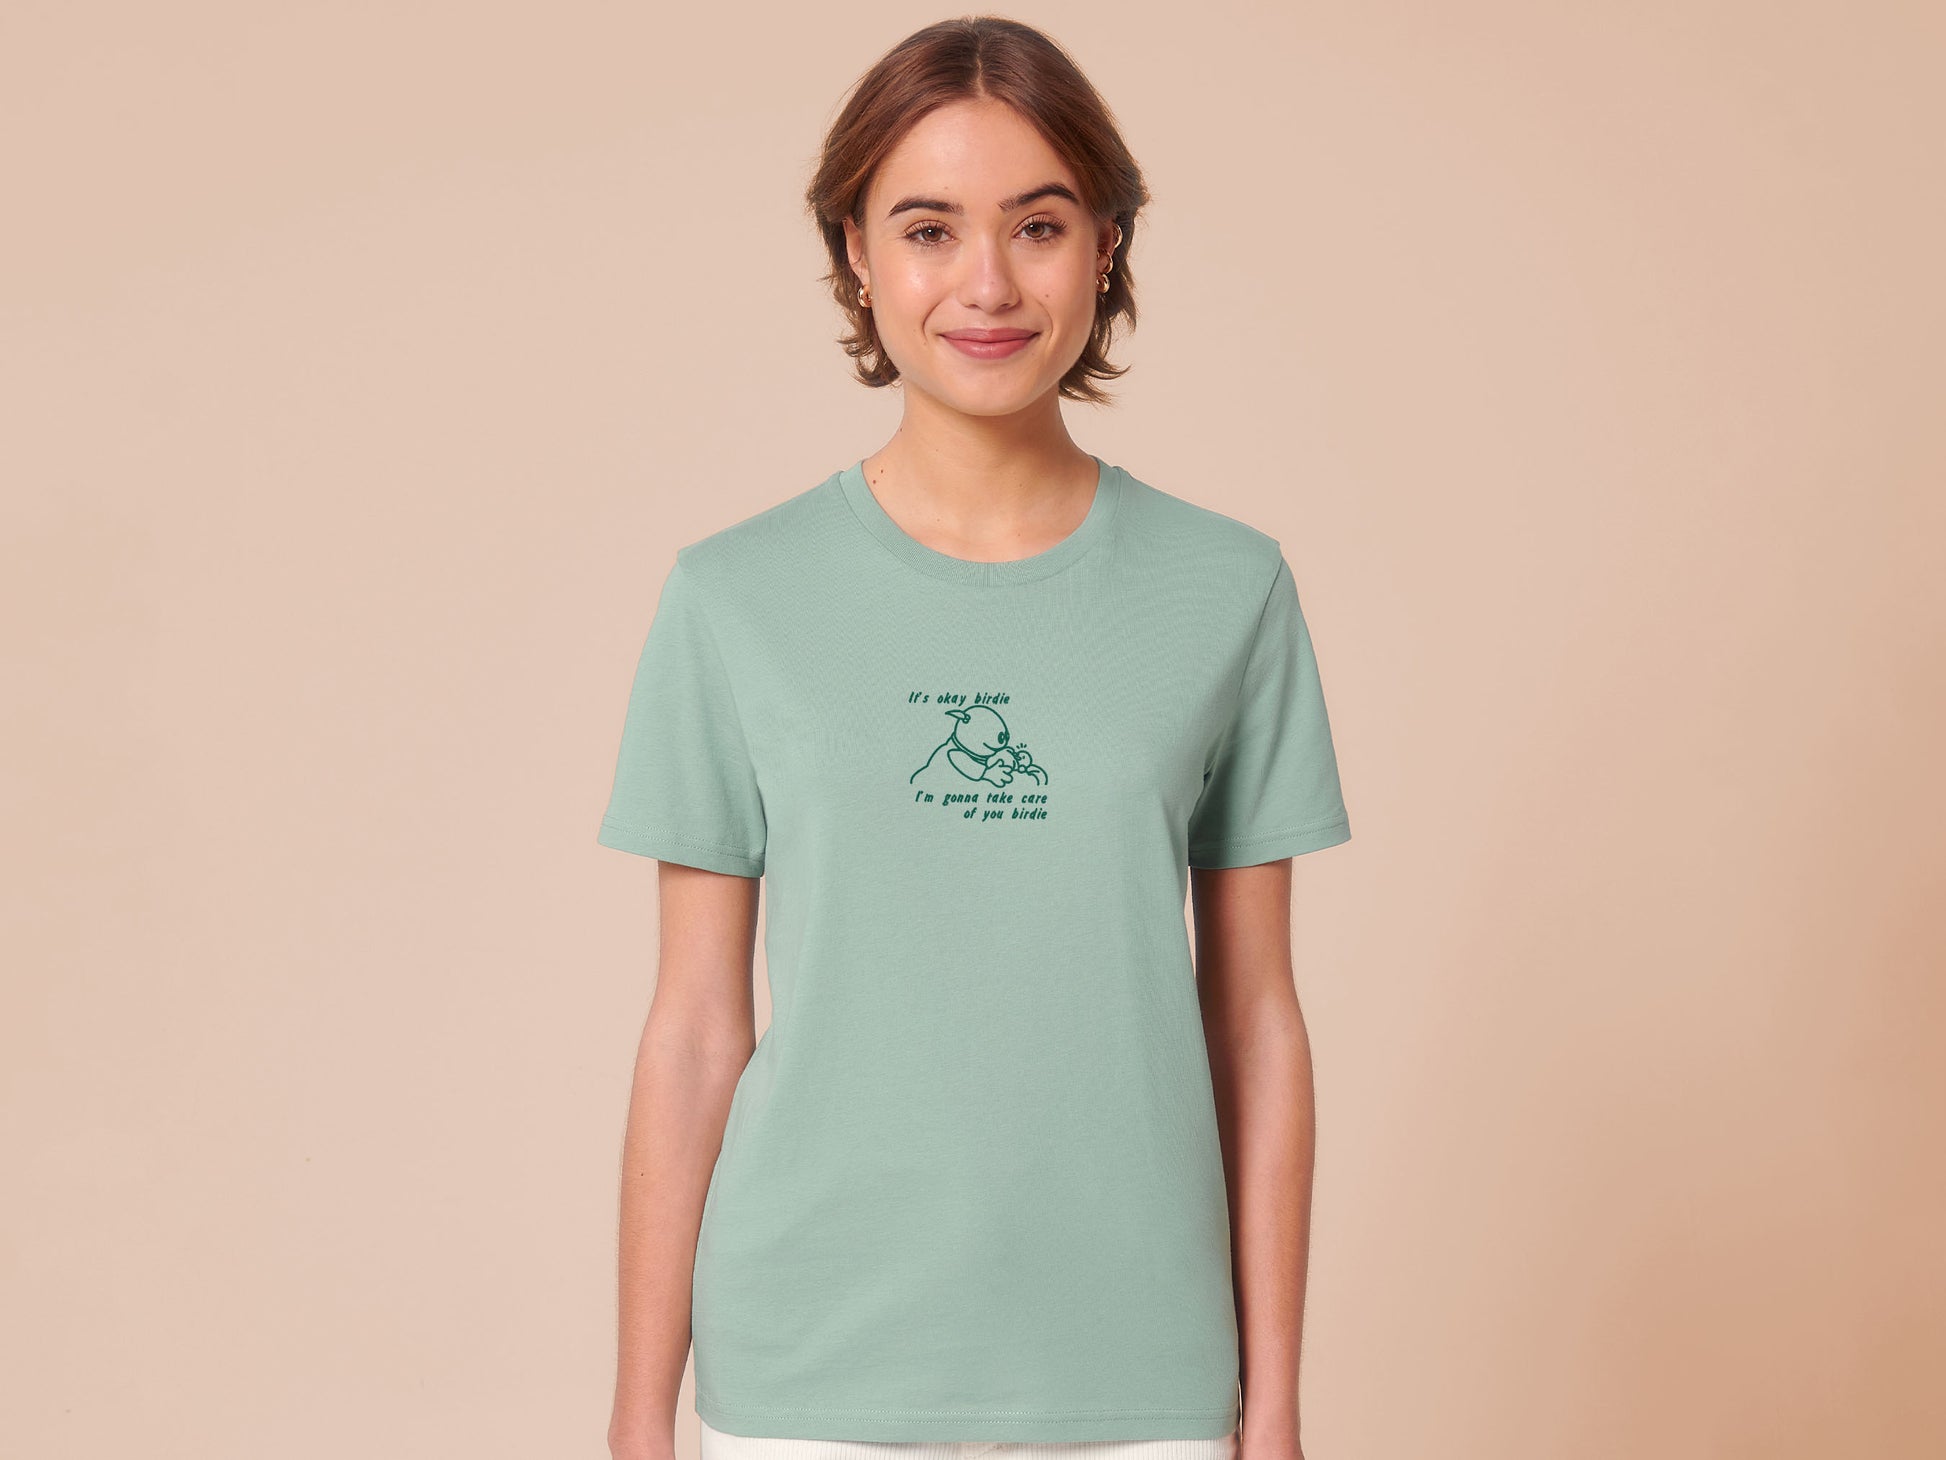 Woman wearing a green embroidered short sleeved t-shirt design of Mona from Nanalan comforting Birdie with the text It's okay Birdie I'm gonna take care of you birdie